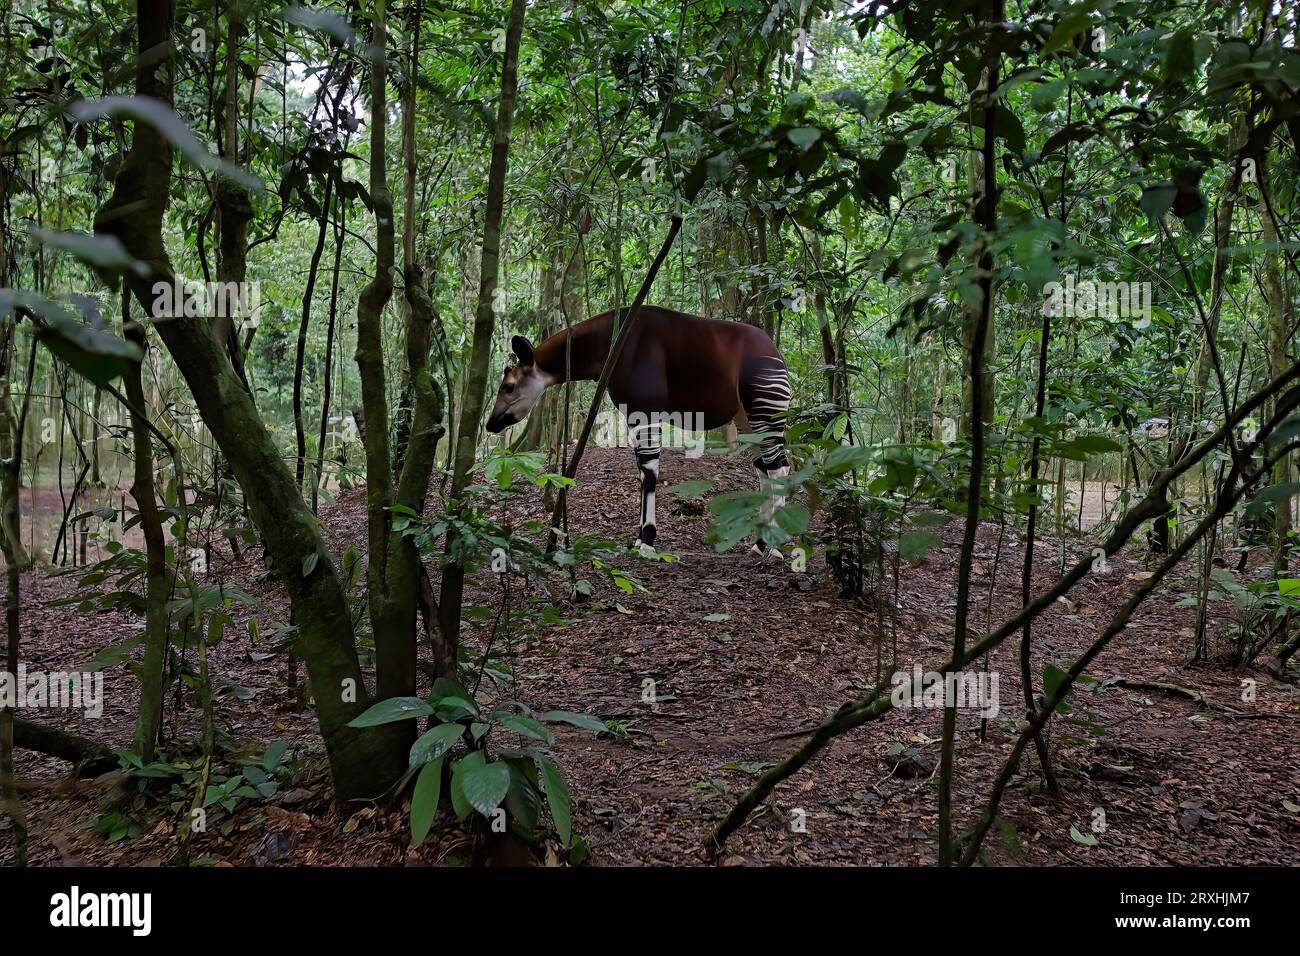 An okapi forages in a wildlife reserve.; Democratic Republic of the Congo, Africa. Stock Photo